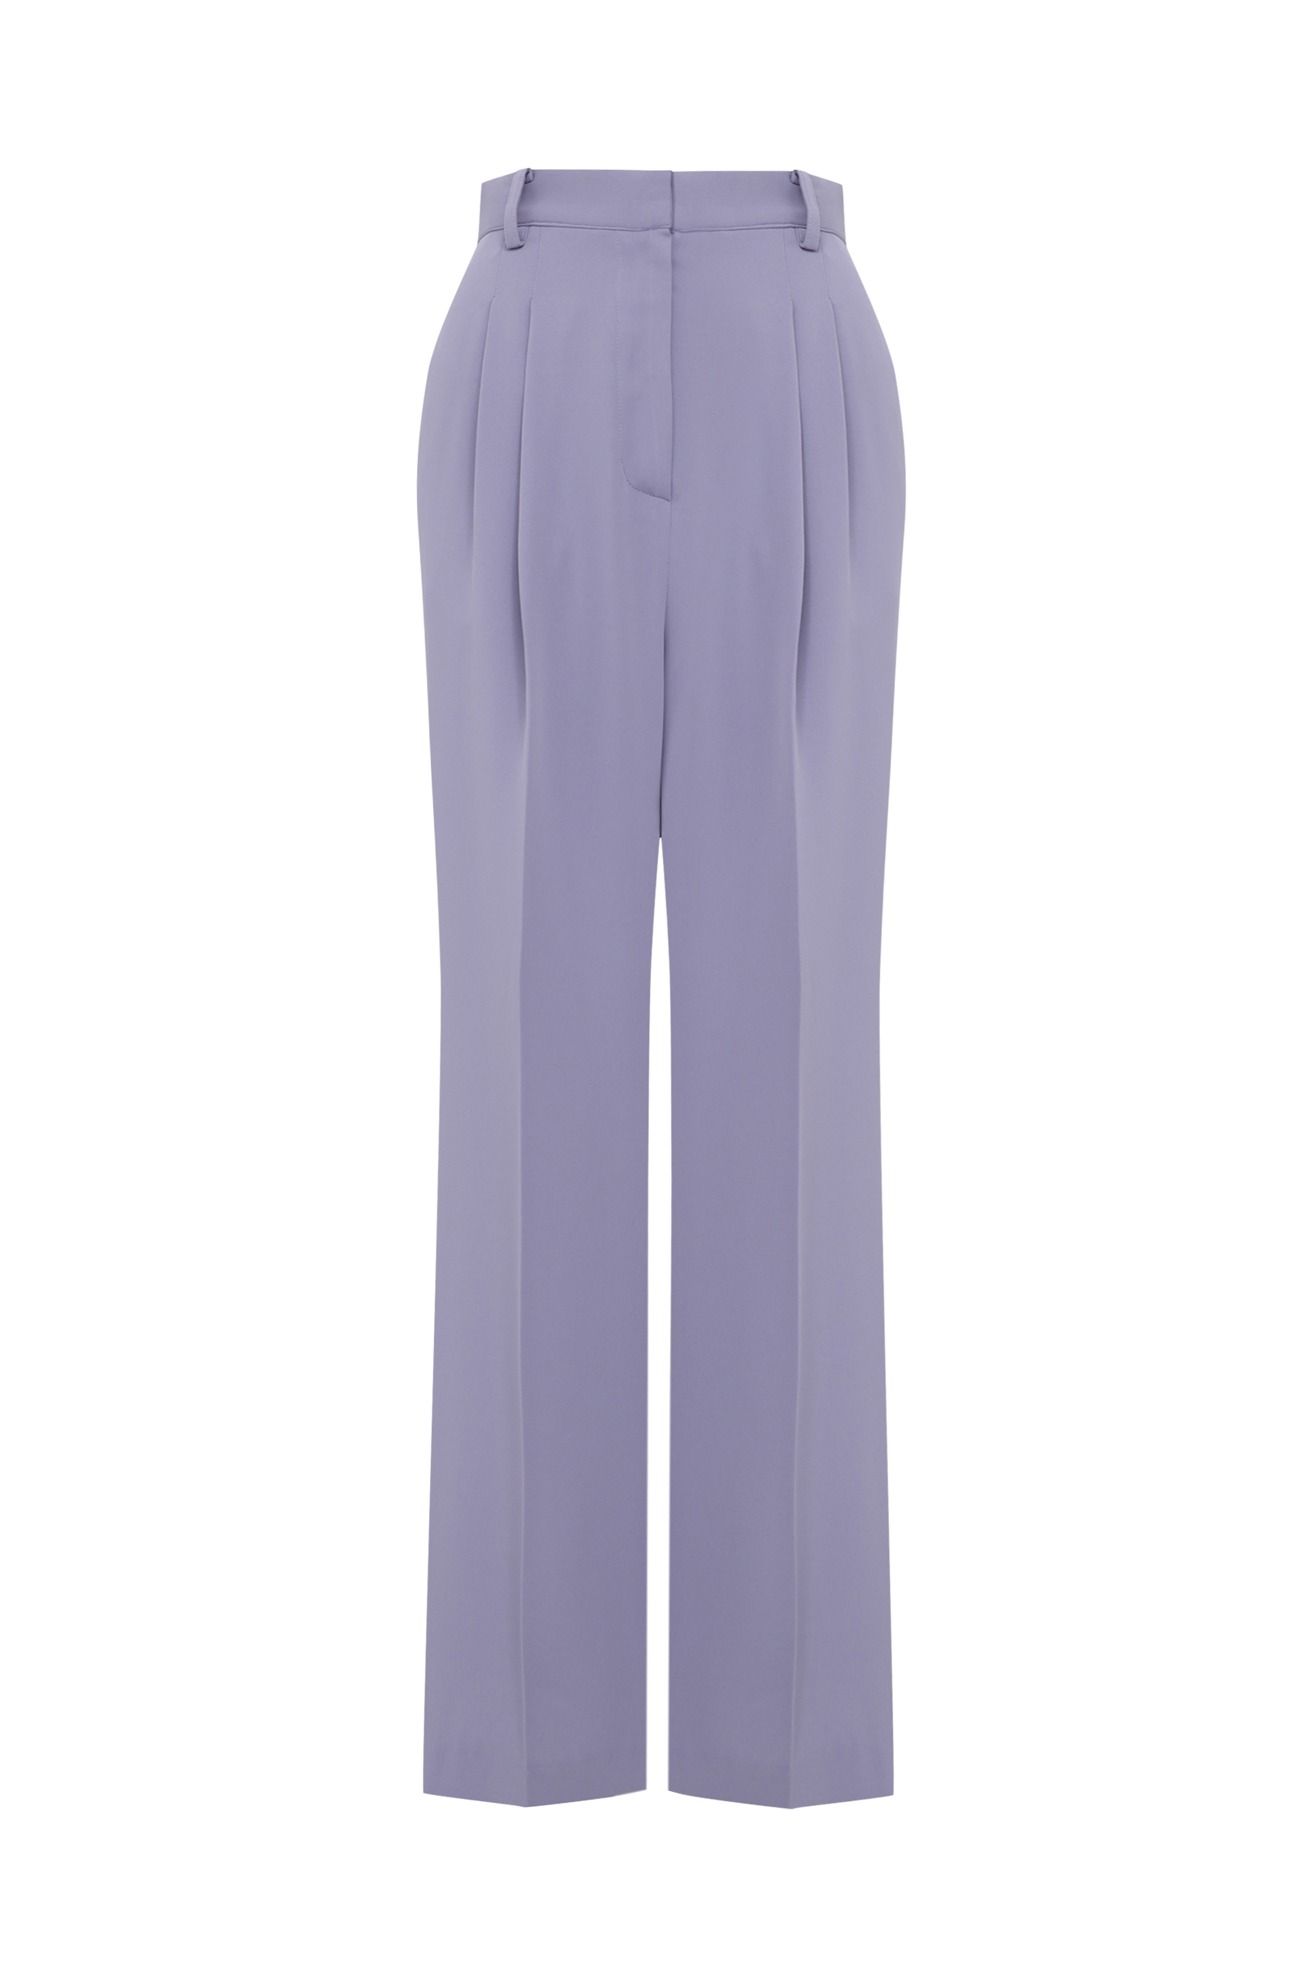 Double Pleated Trousers  (6/6일 순차발송)